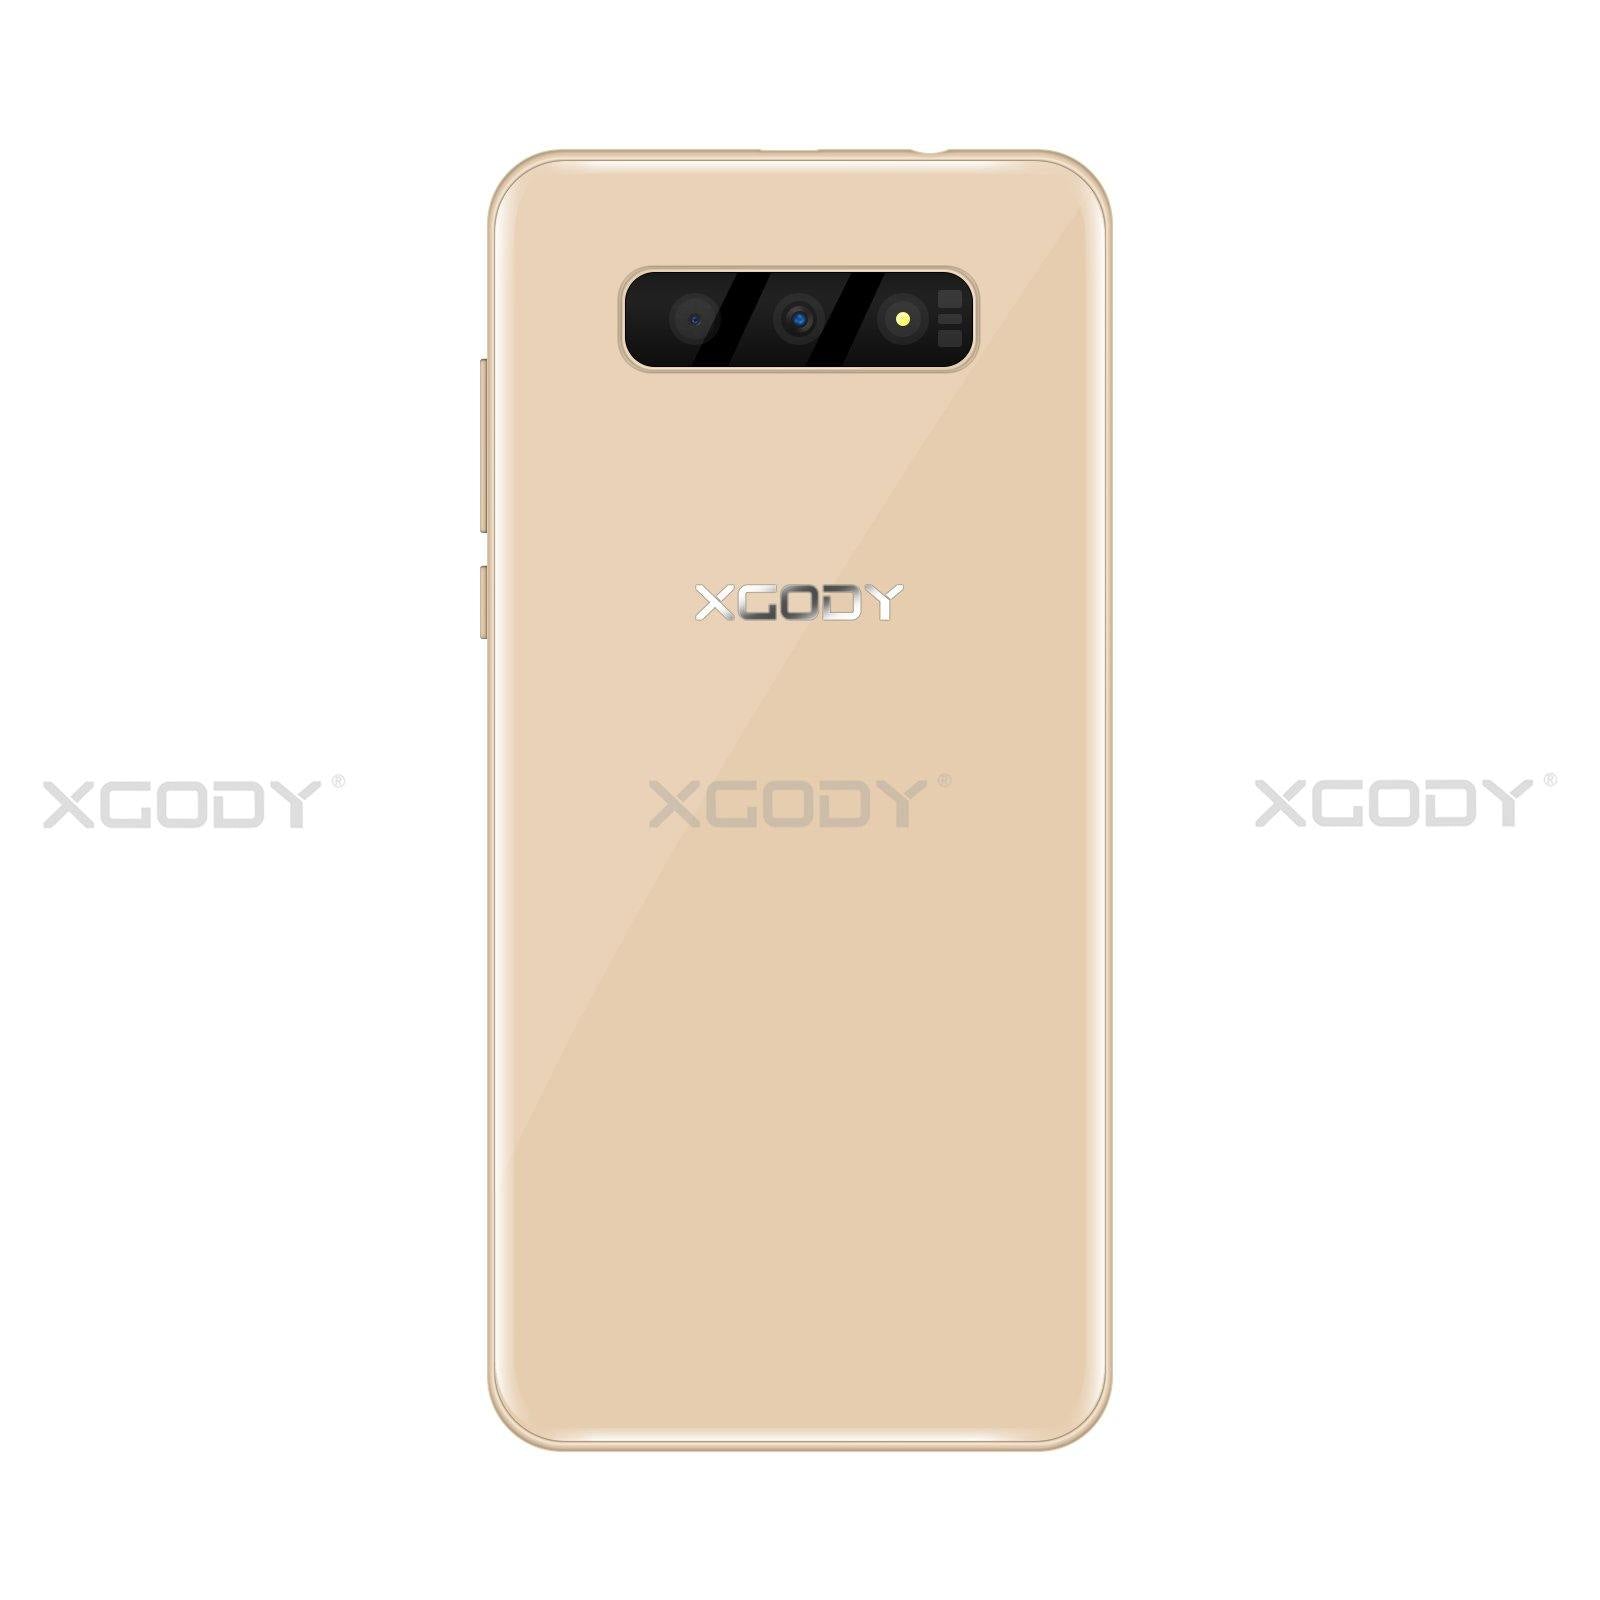 Cost-effective and Most worthwhile XGODY S10 Zoll Fully Unlocked 16GB Dual SIM Smarthphone - XGODY 